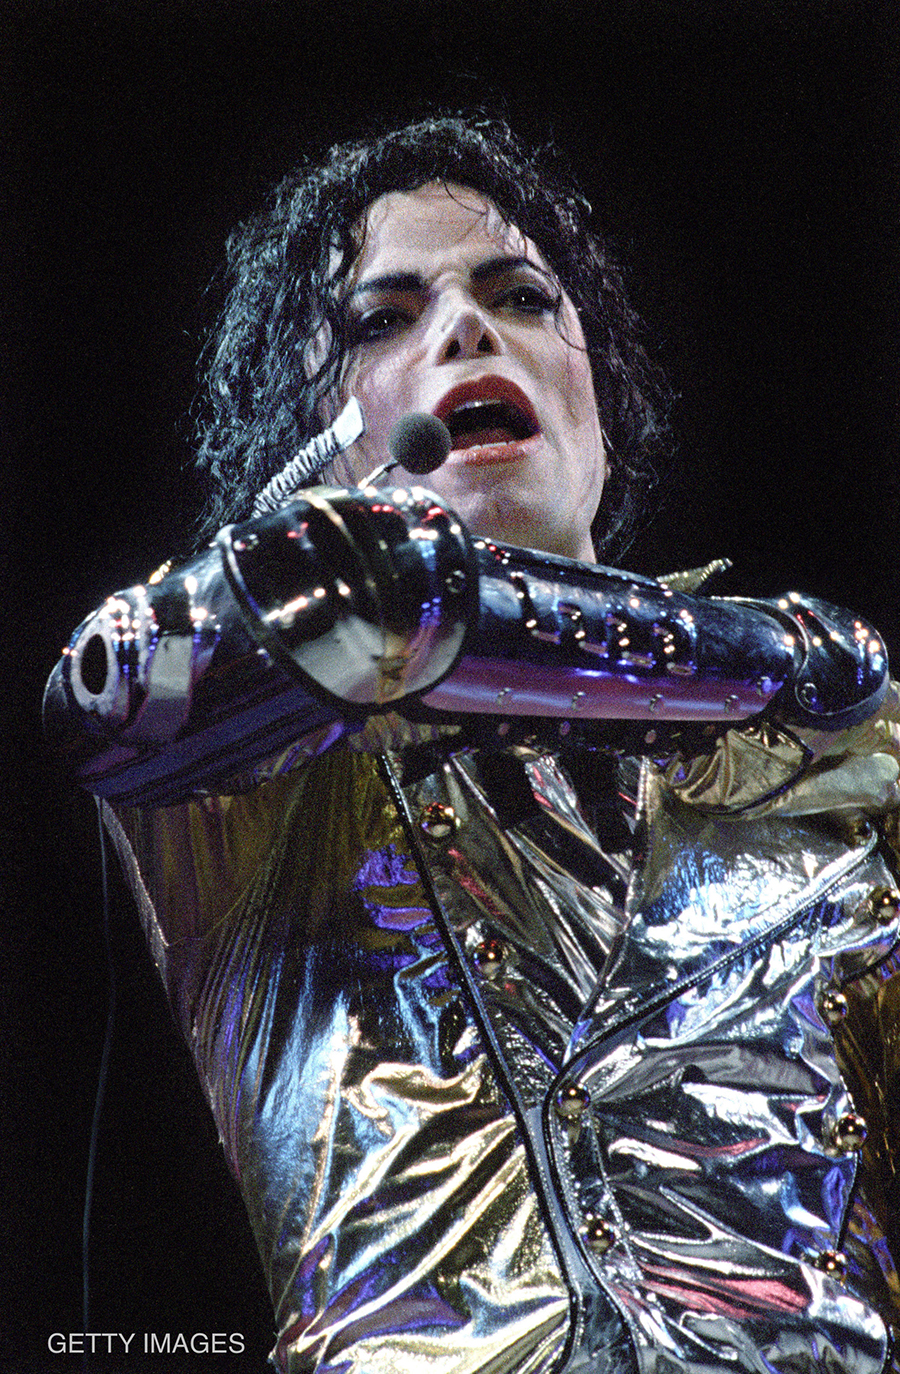 Michael Jackson performs in Amsterdam during HIStory World Tour September 28, 1996